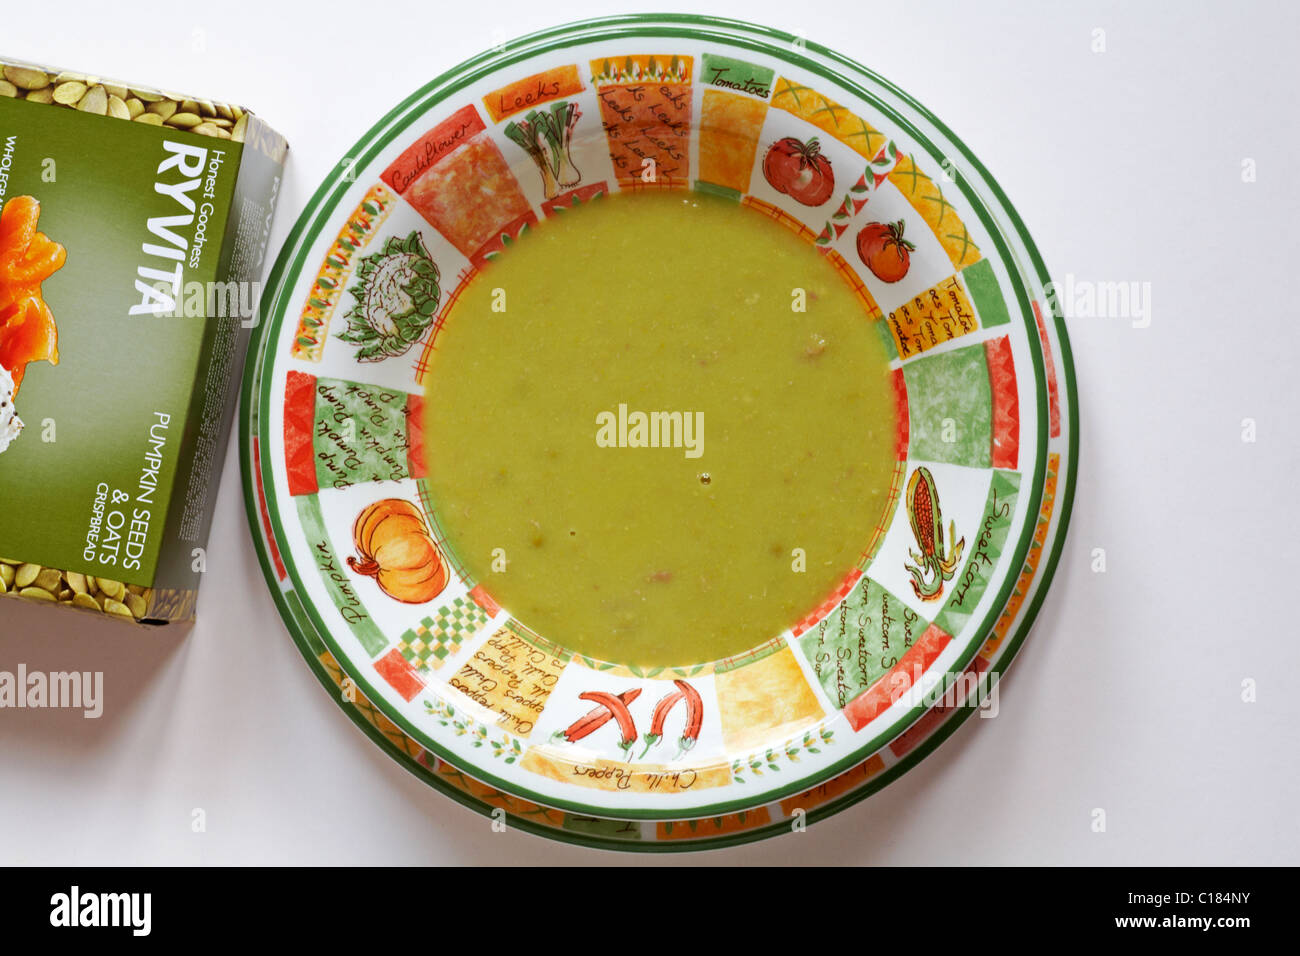 Bowl of pea and ham soup with packet of Ryvita pumpkin seeds and oats crispbread set on white background Stock Photo